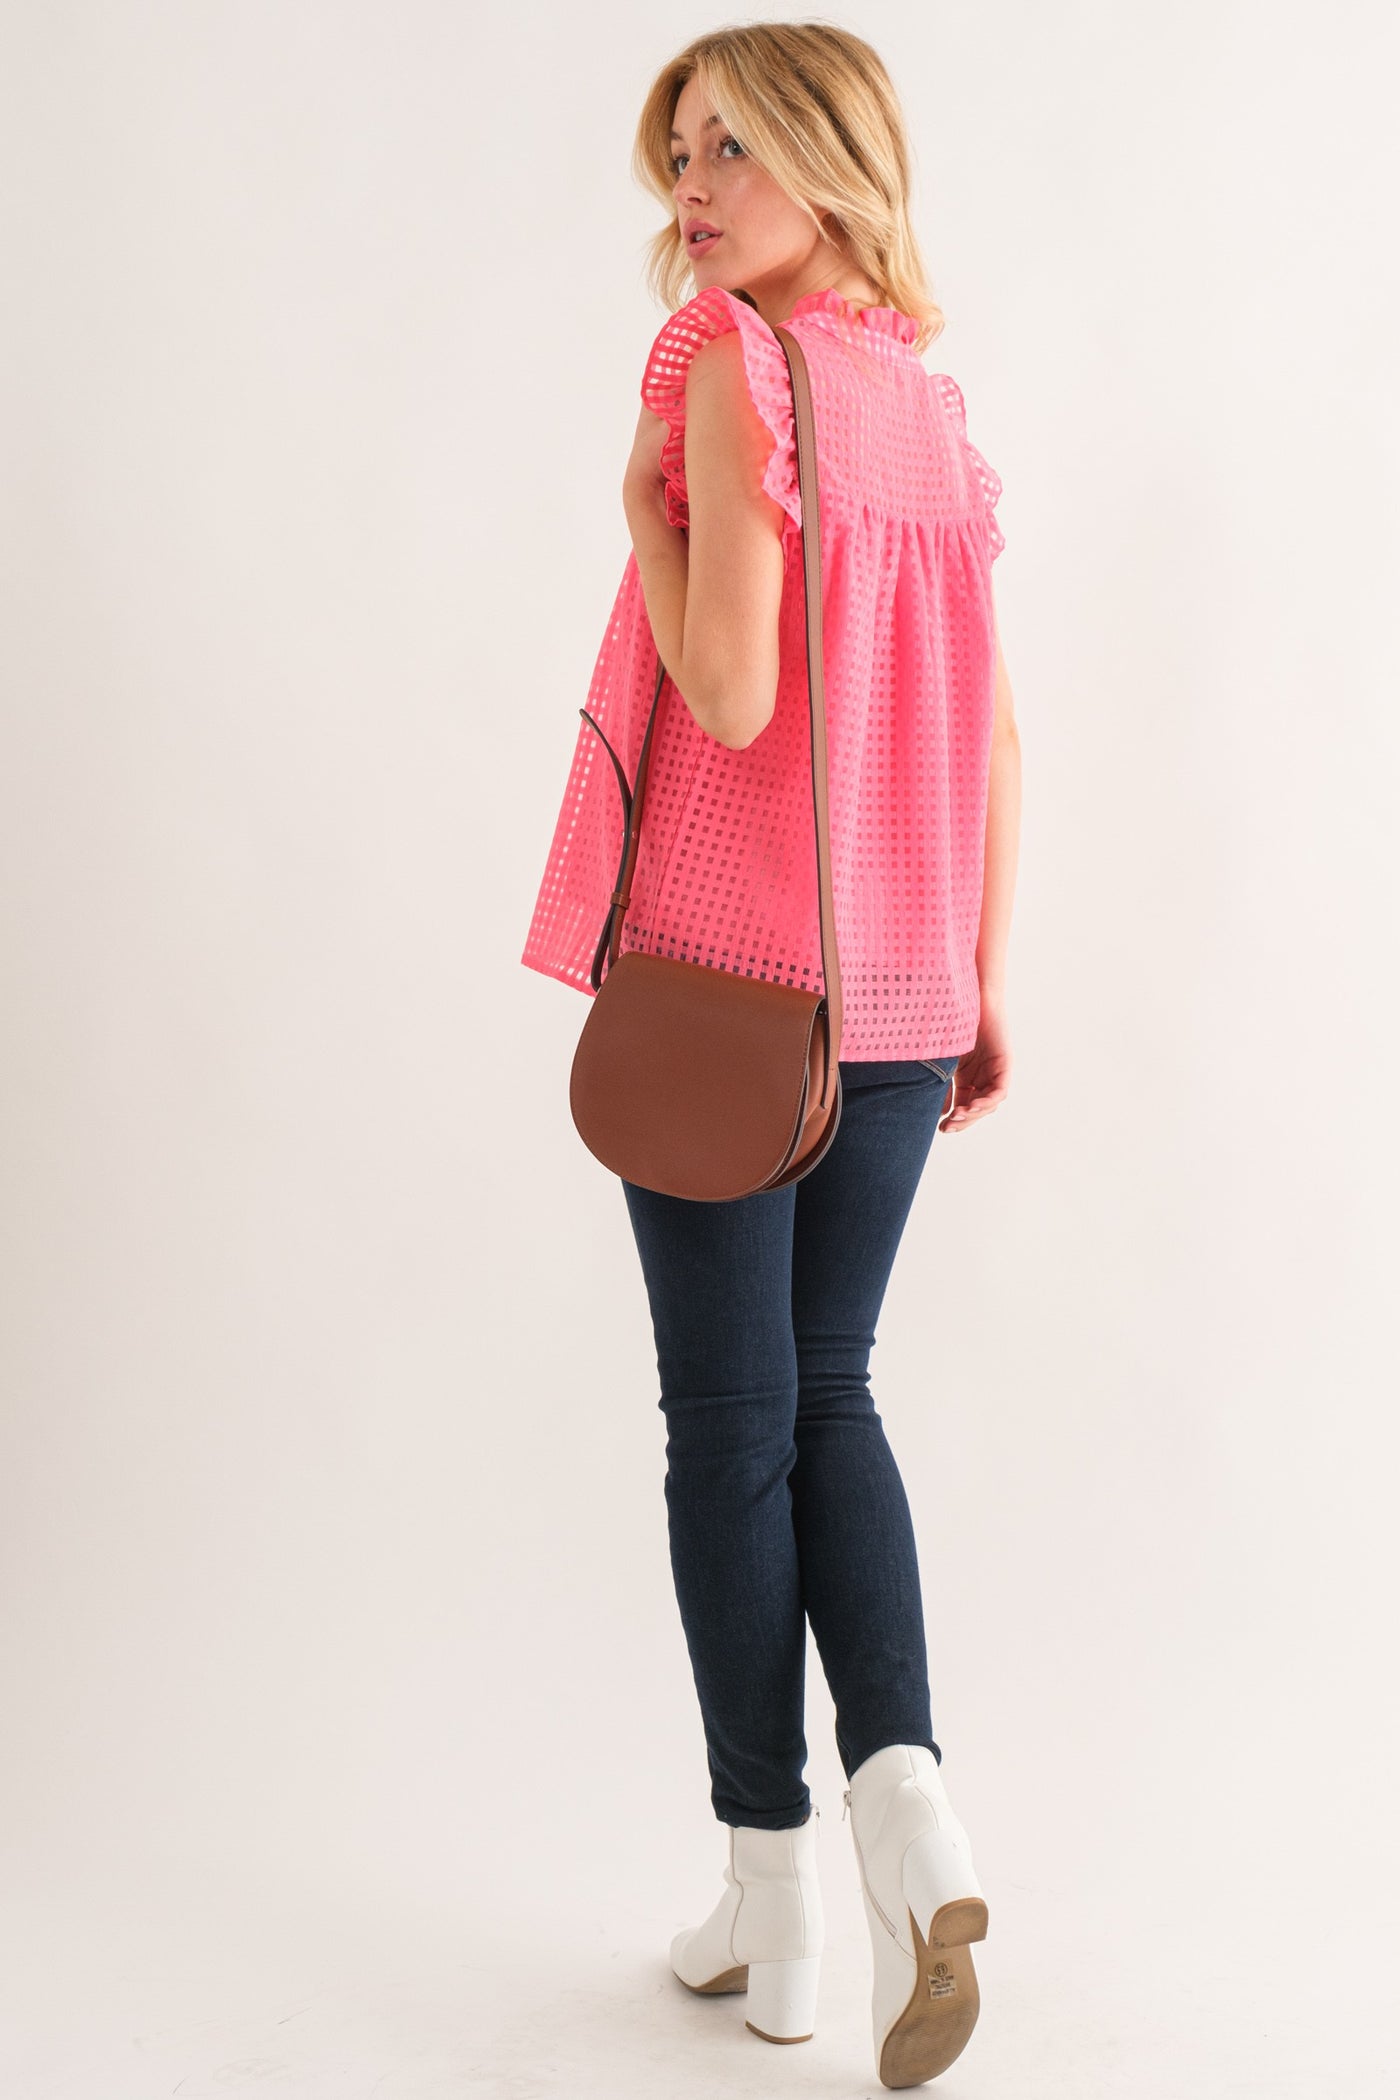 Ruffled my Feather Pink Gridded Top